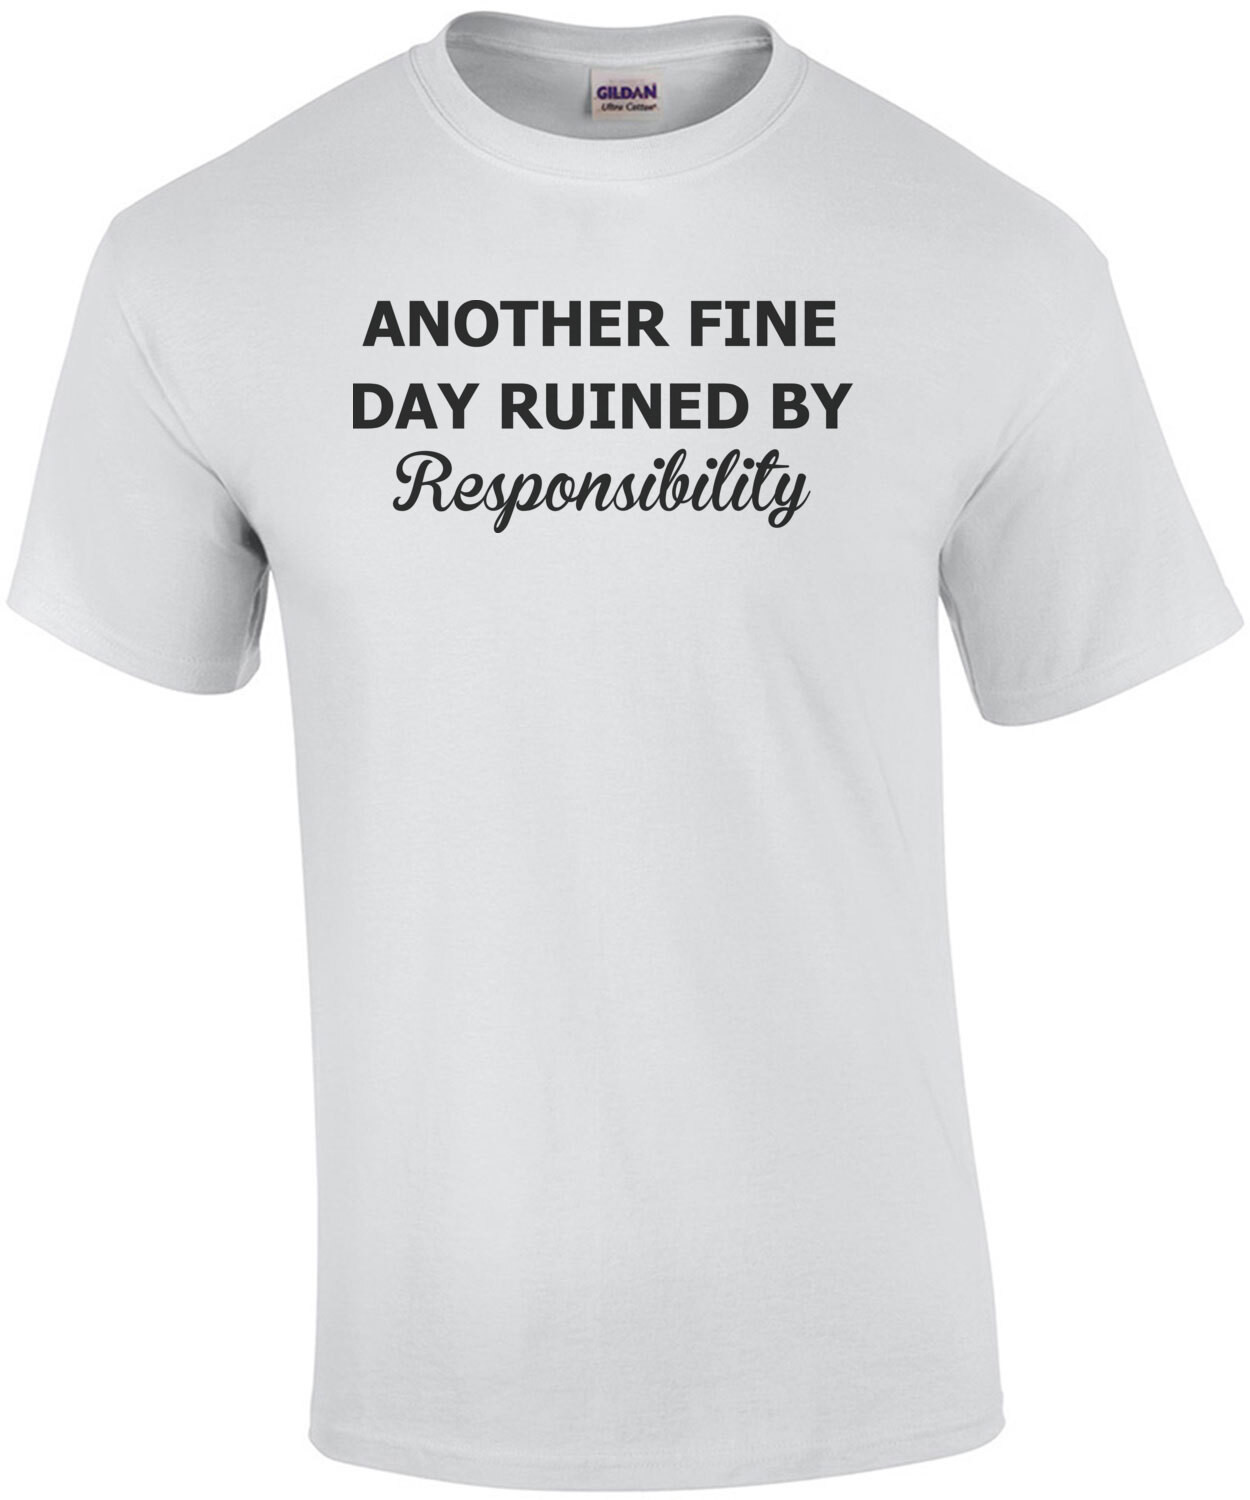 ANOTHER FINE DAY RUINED BY Responsibility - Sarcastic T-Shirt